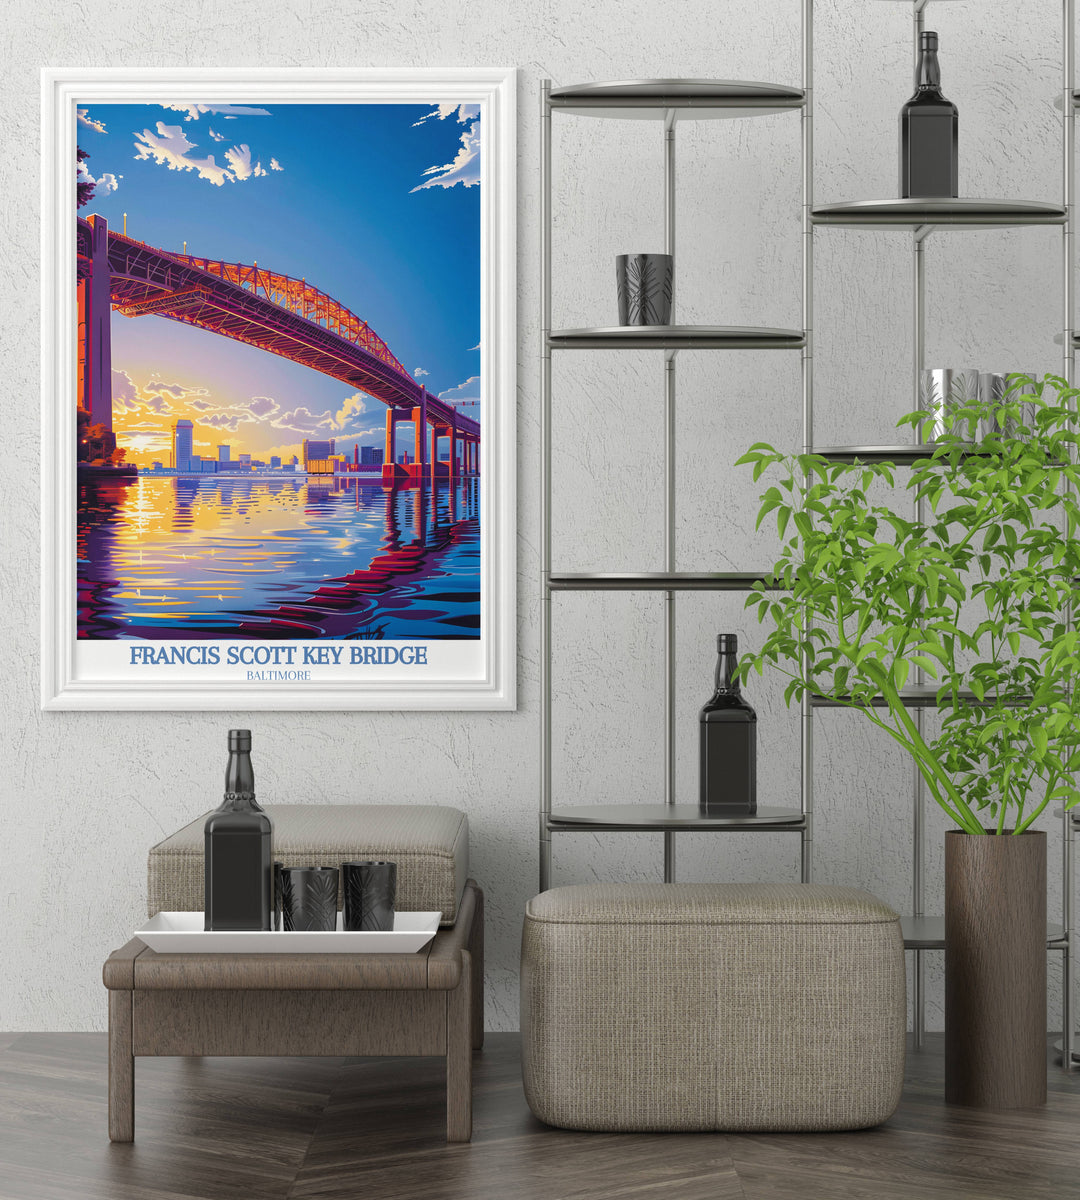 Black and white Maryland Art Print of the Francis Scott Key Bridge, offering a classic look for those decorating with a monochrome theme.